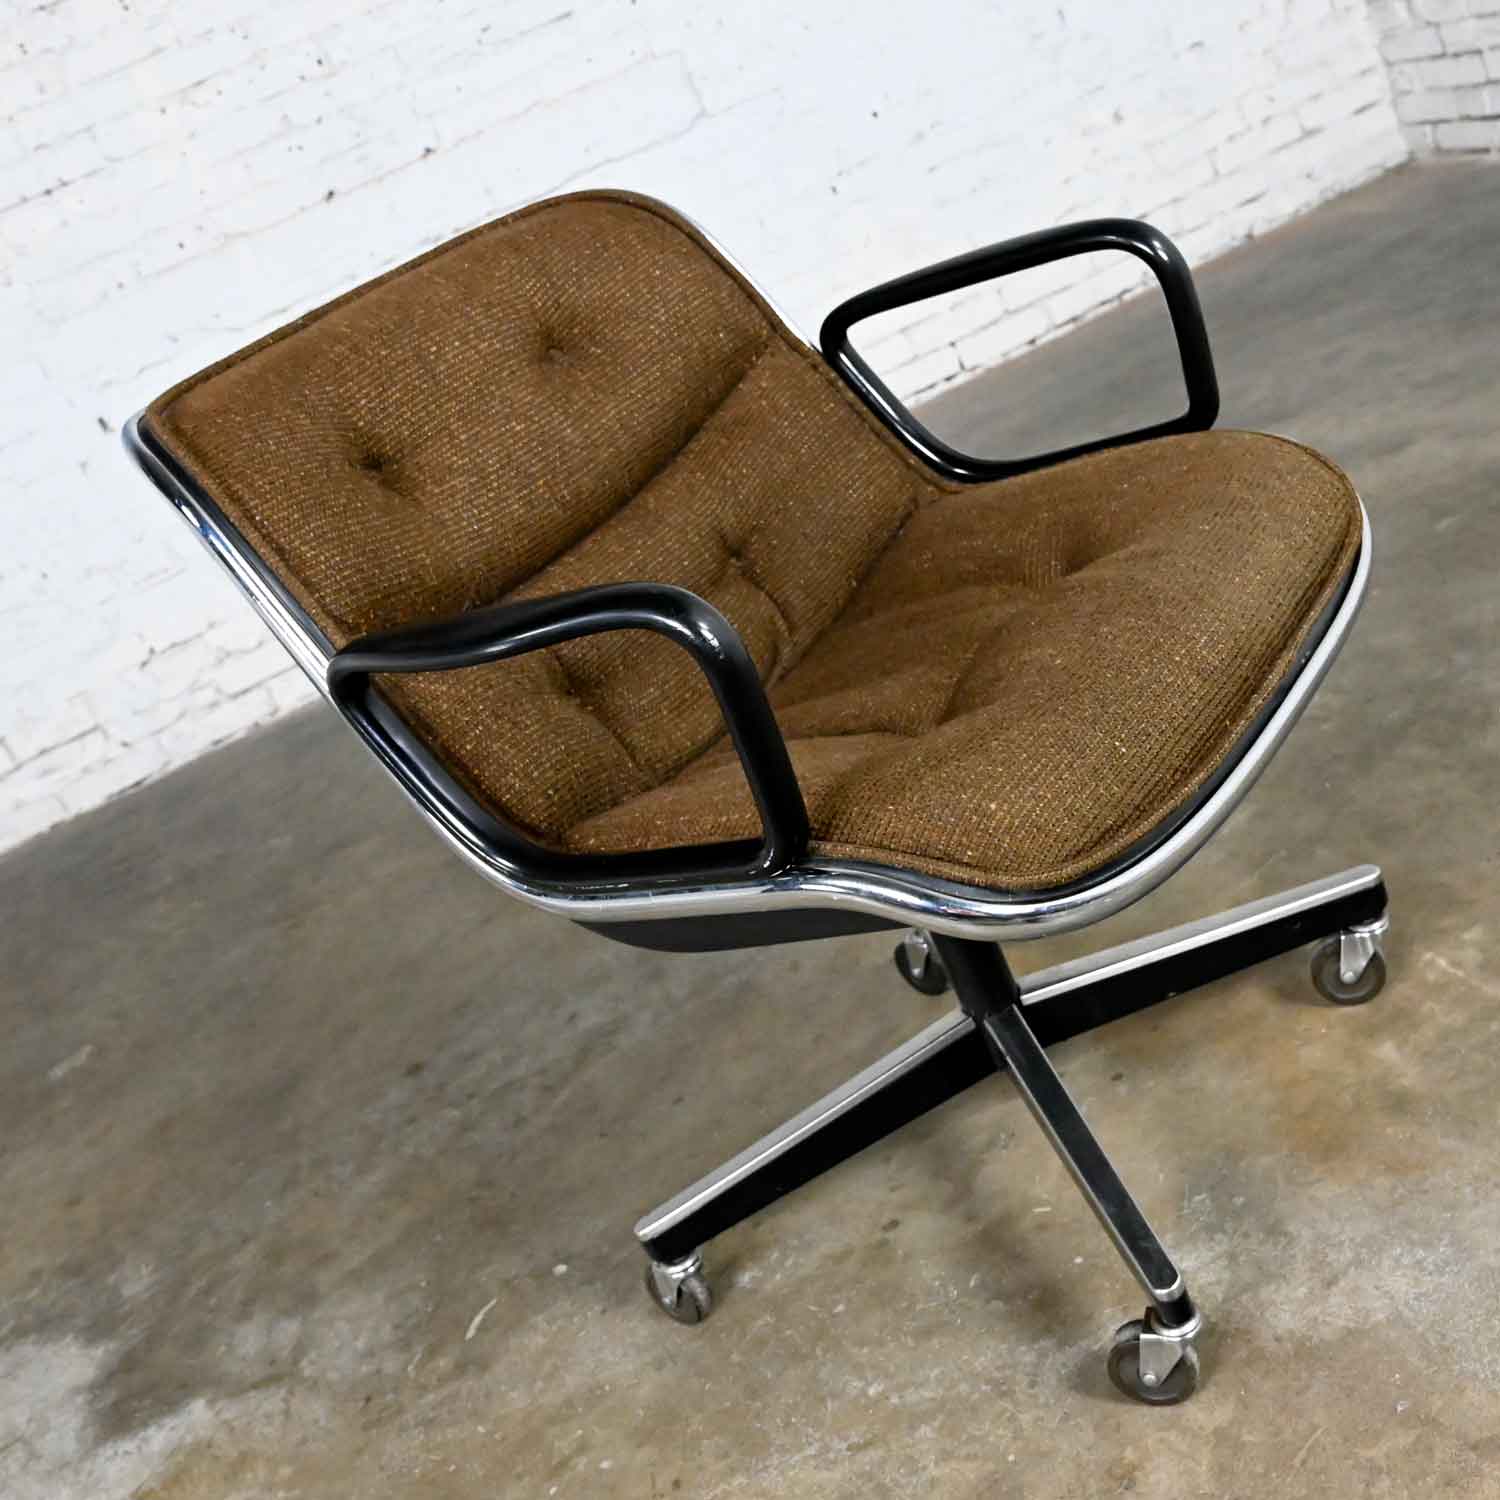 Executive Armchair by Charles Pollock for Knoll Brown Tweed Hopsacking 4 Prong Base with Casters